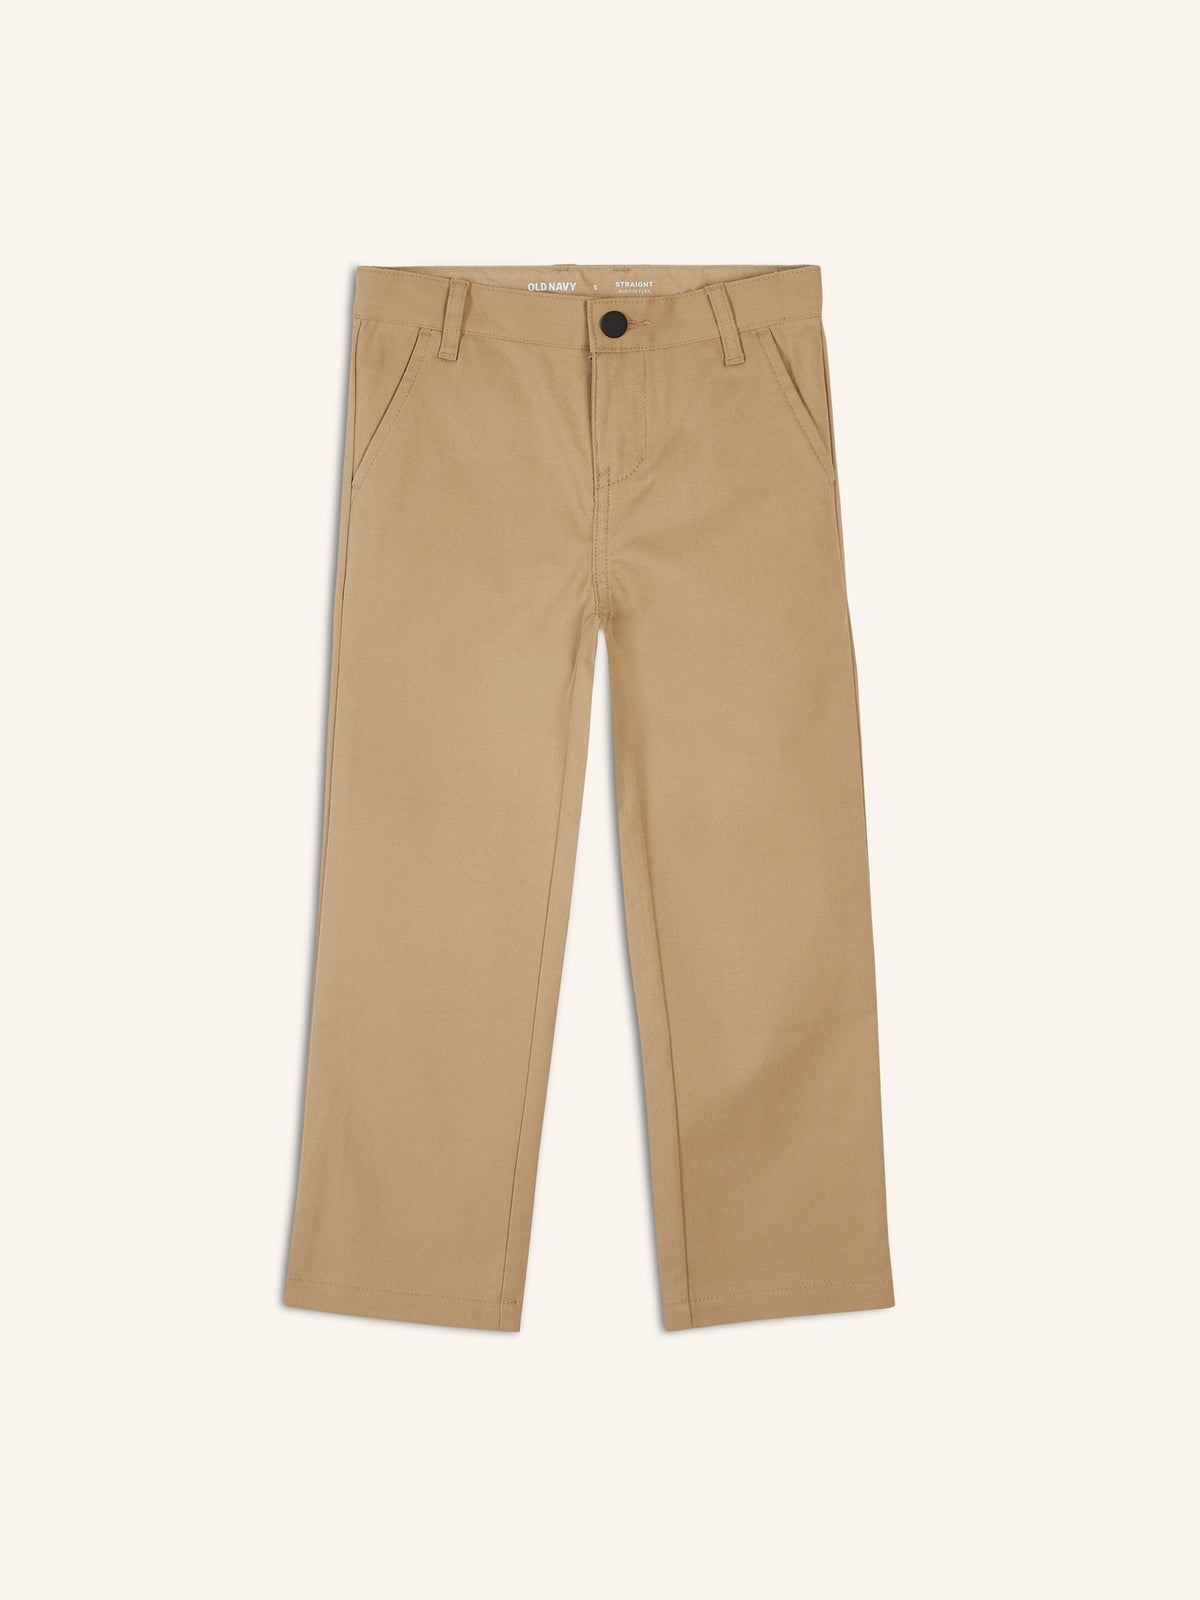 Straight Built-In Flex Uniform Pants for Boys - Old Navy Philippines